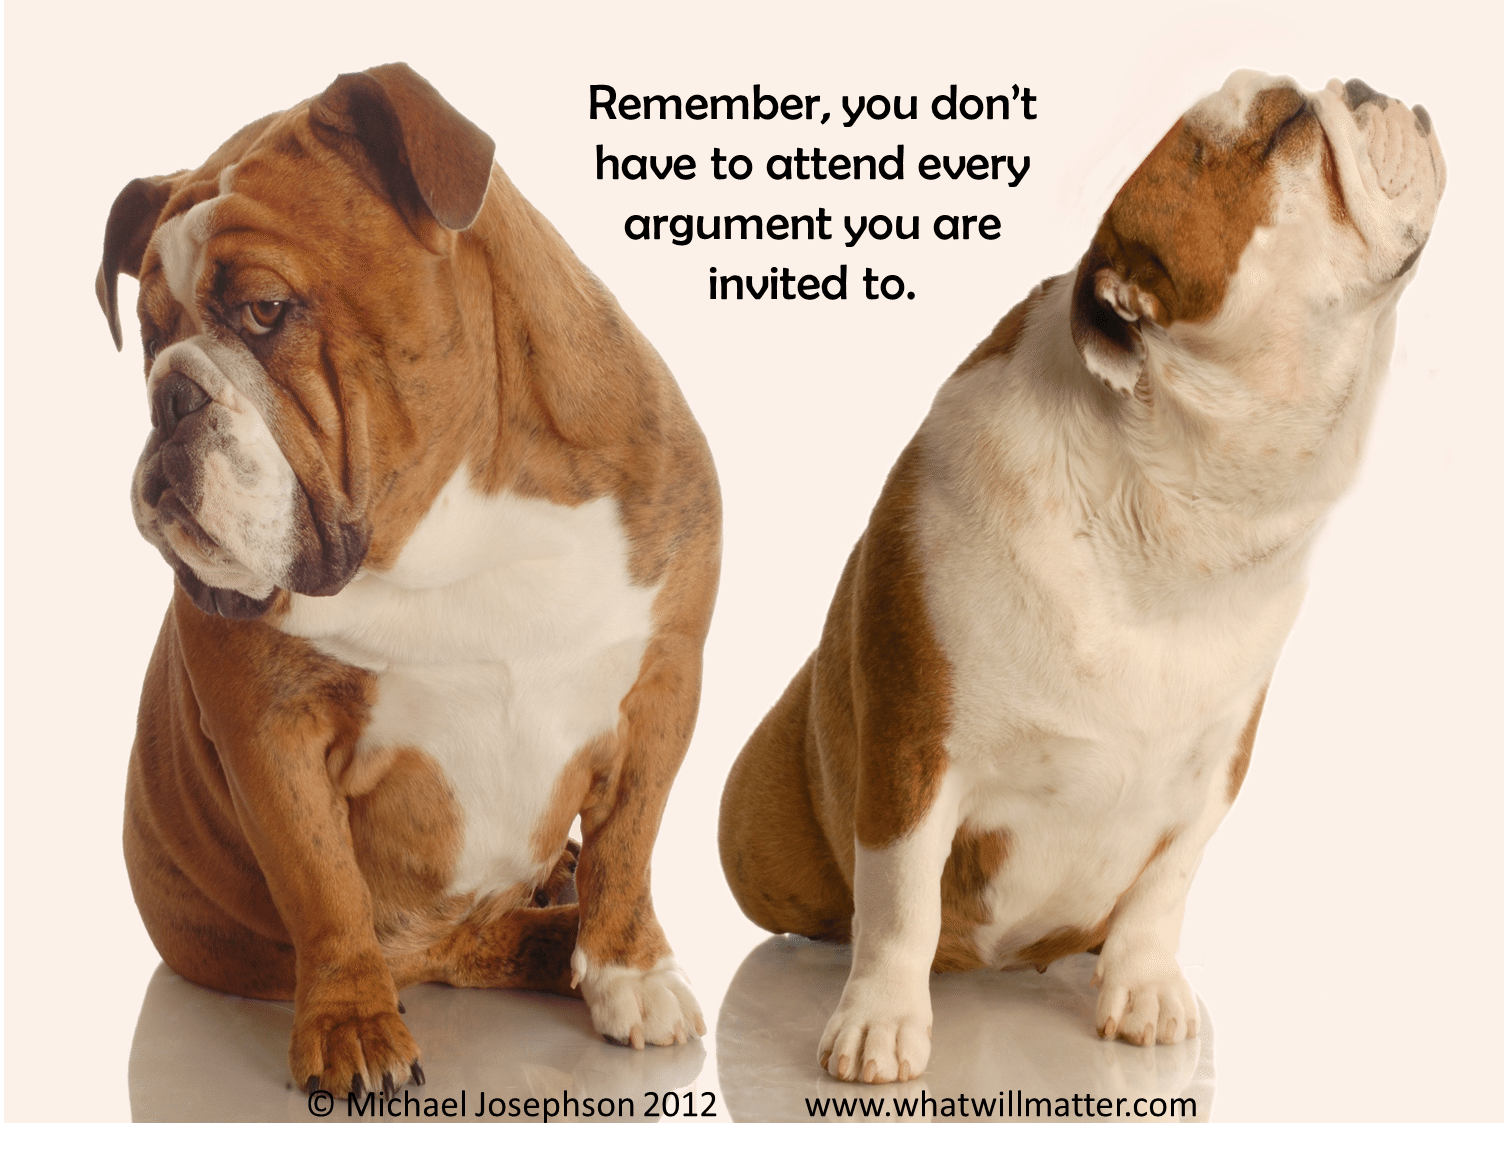 Remember you don't have to attend every argument you are invited to.